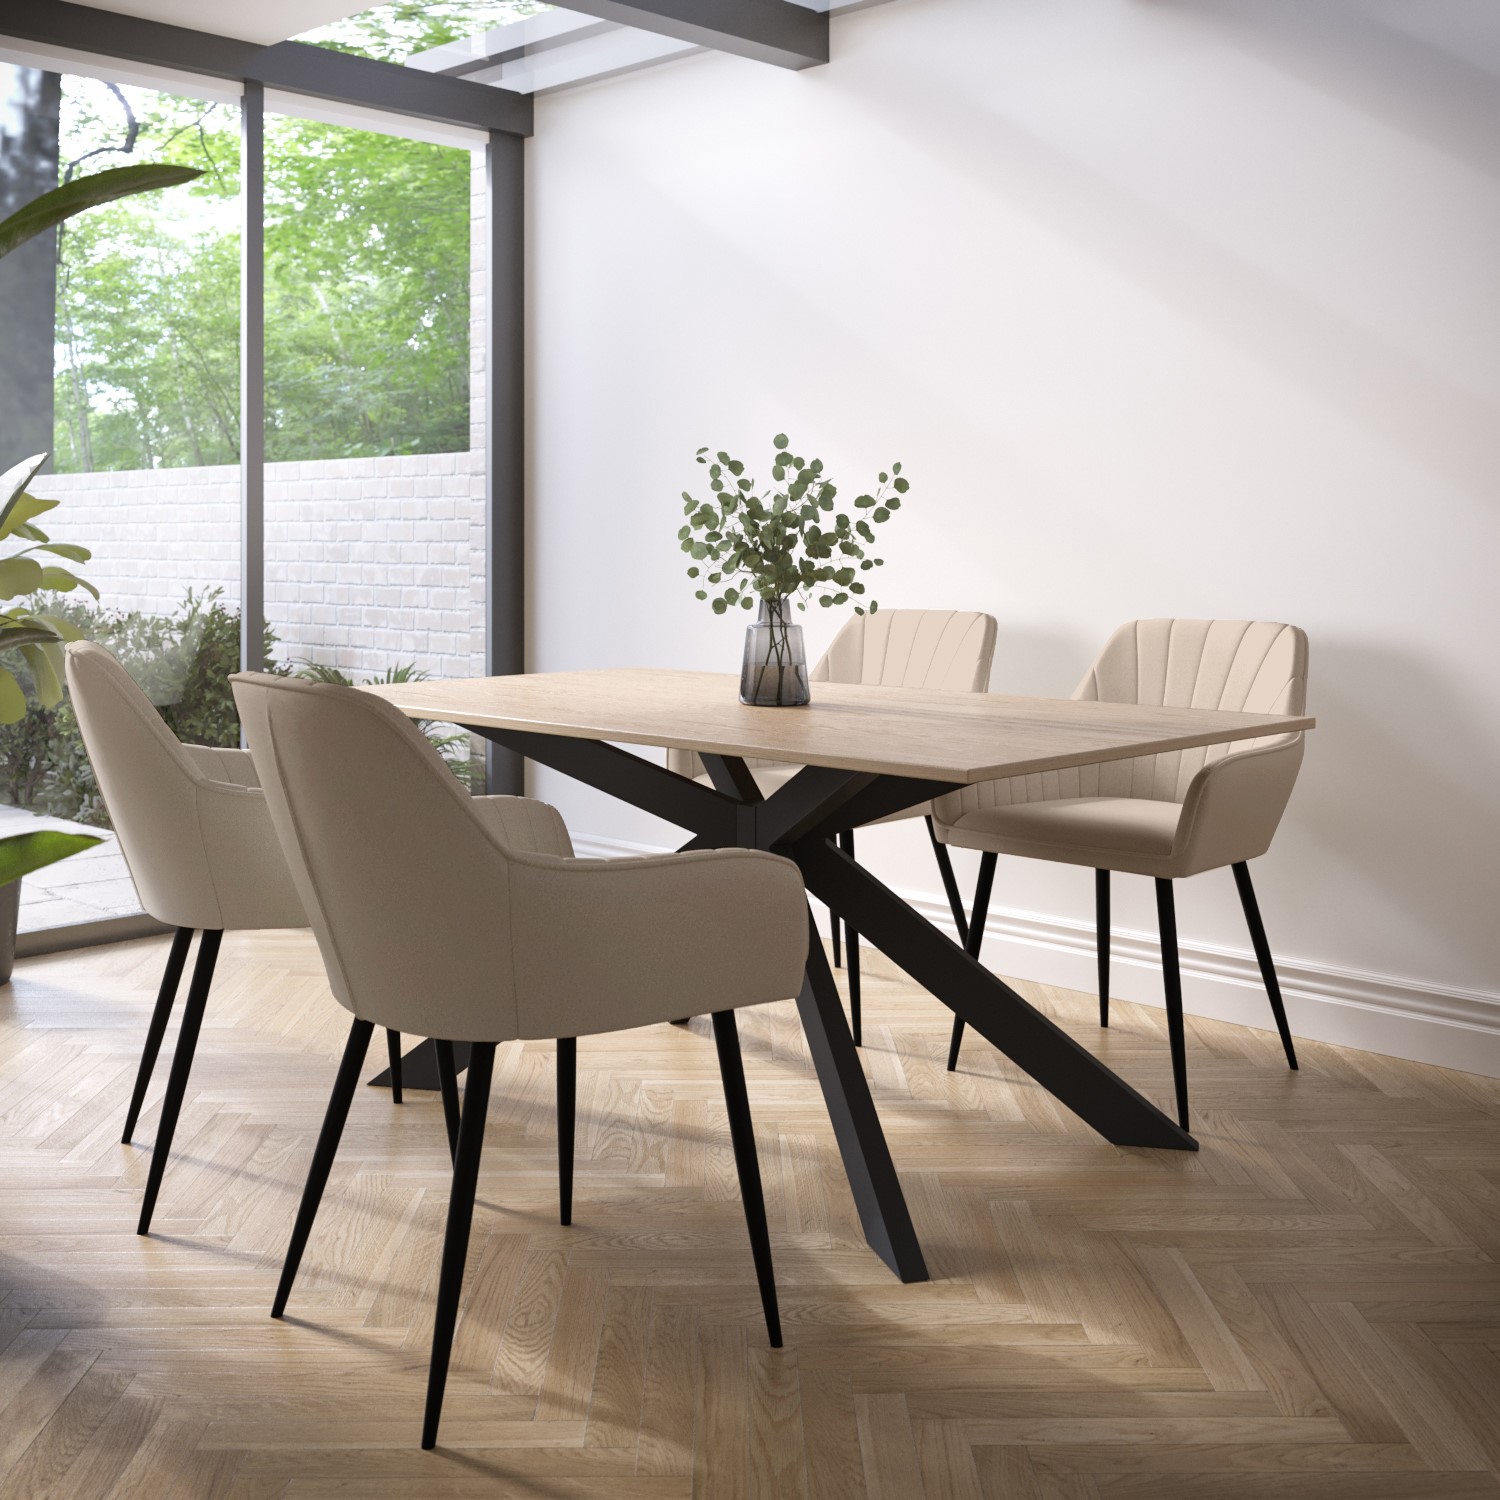 Photo of Light oak dining table with 4 beige fabric dining chairs - carson